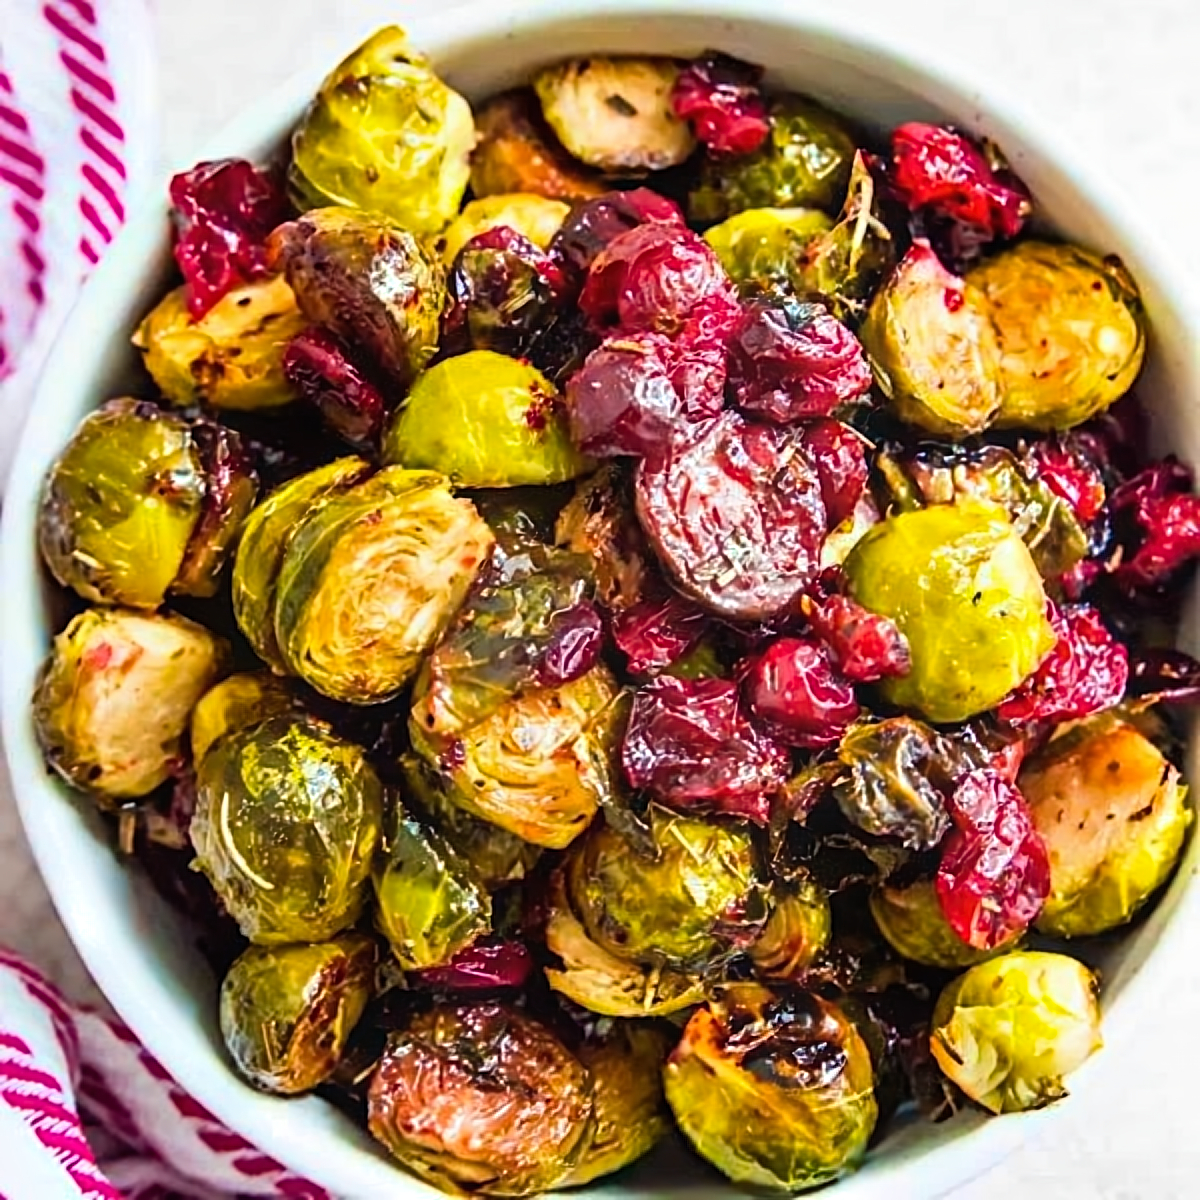 7. Maple Balsamic Brussels Sprouts and Cranberries - holiday brussel sprout recipes